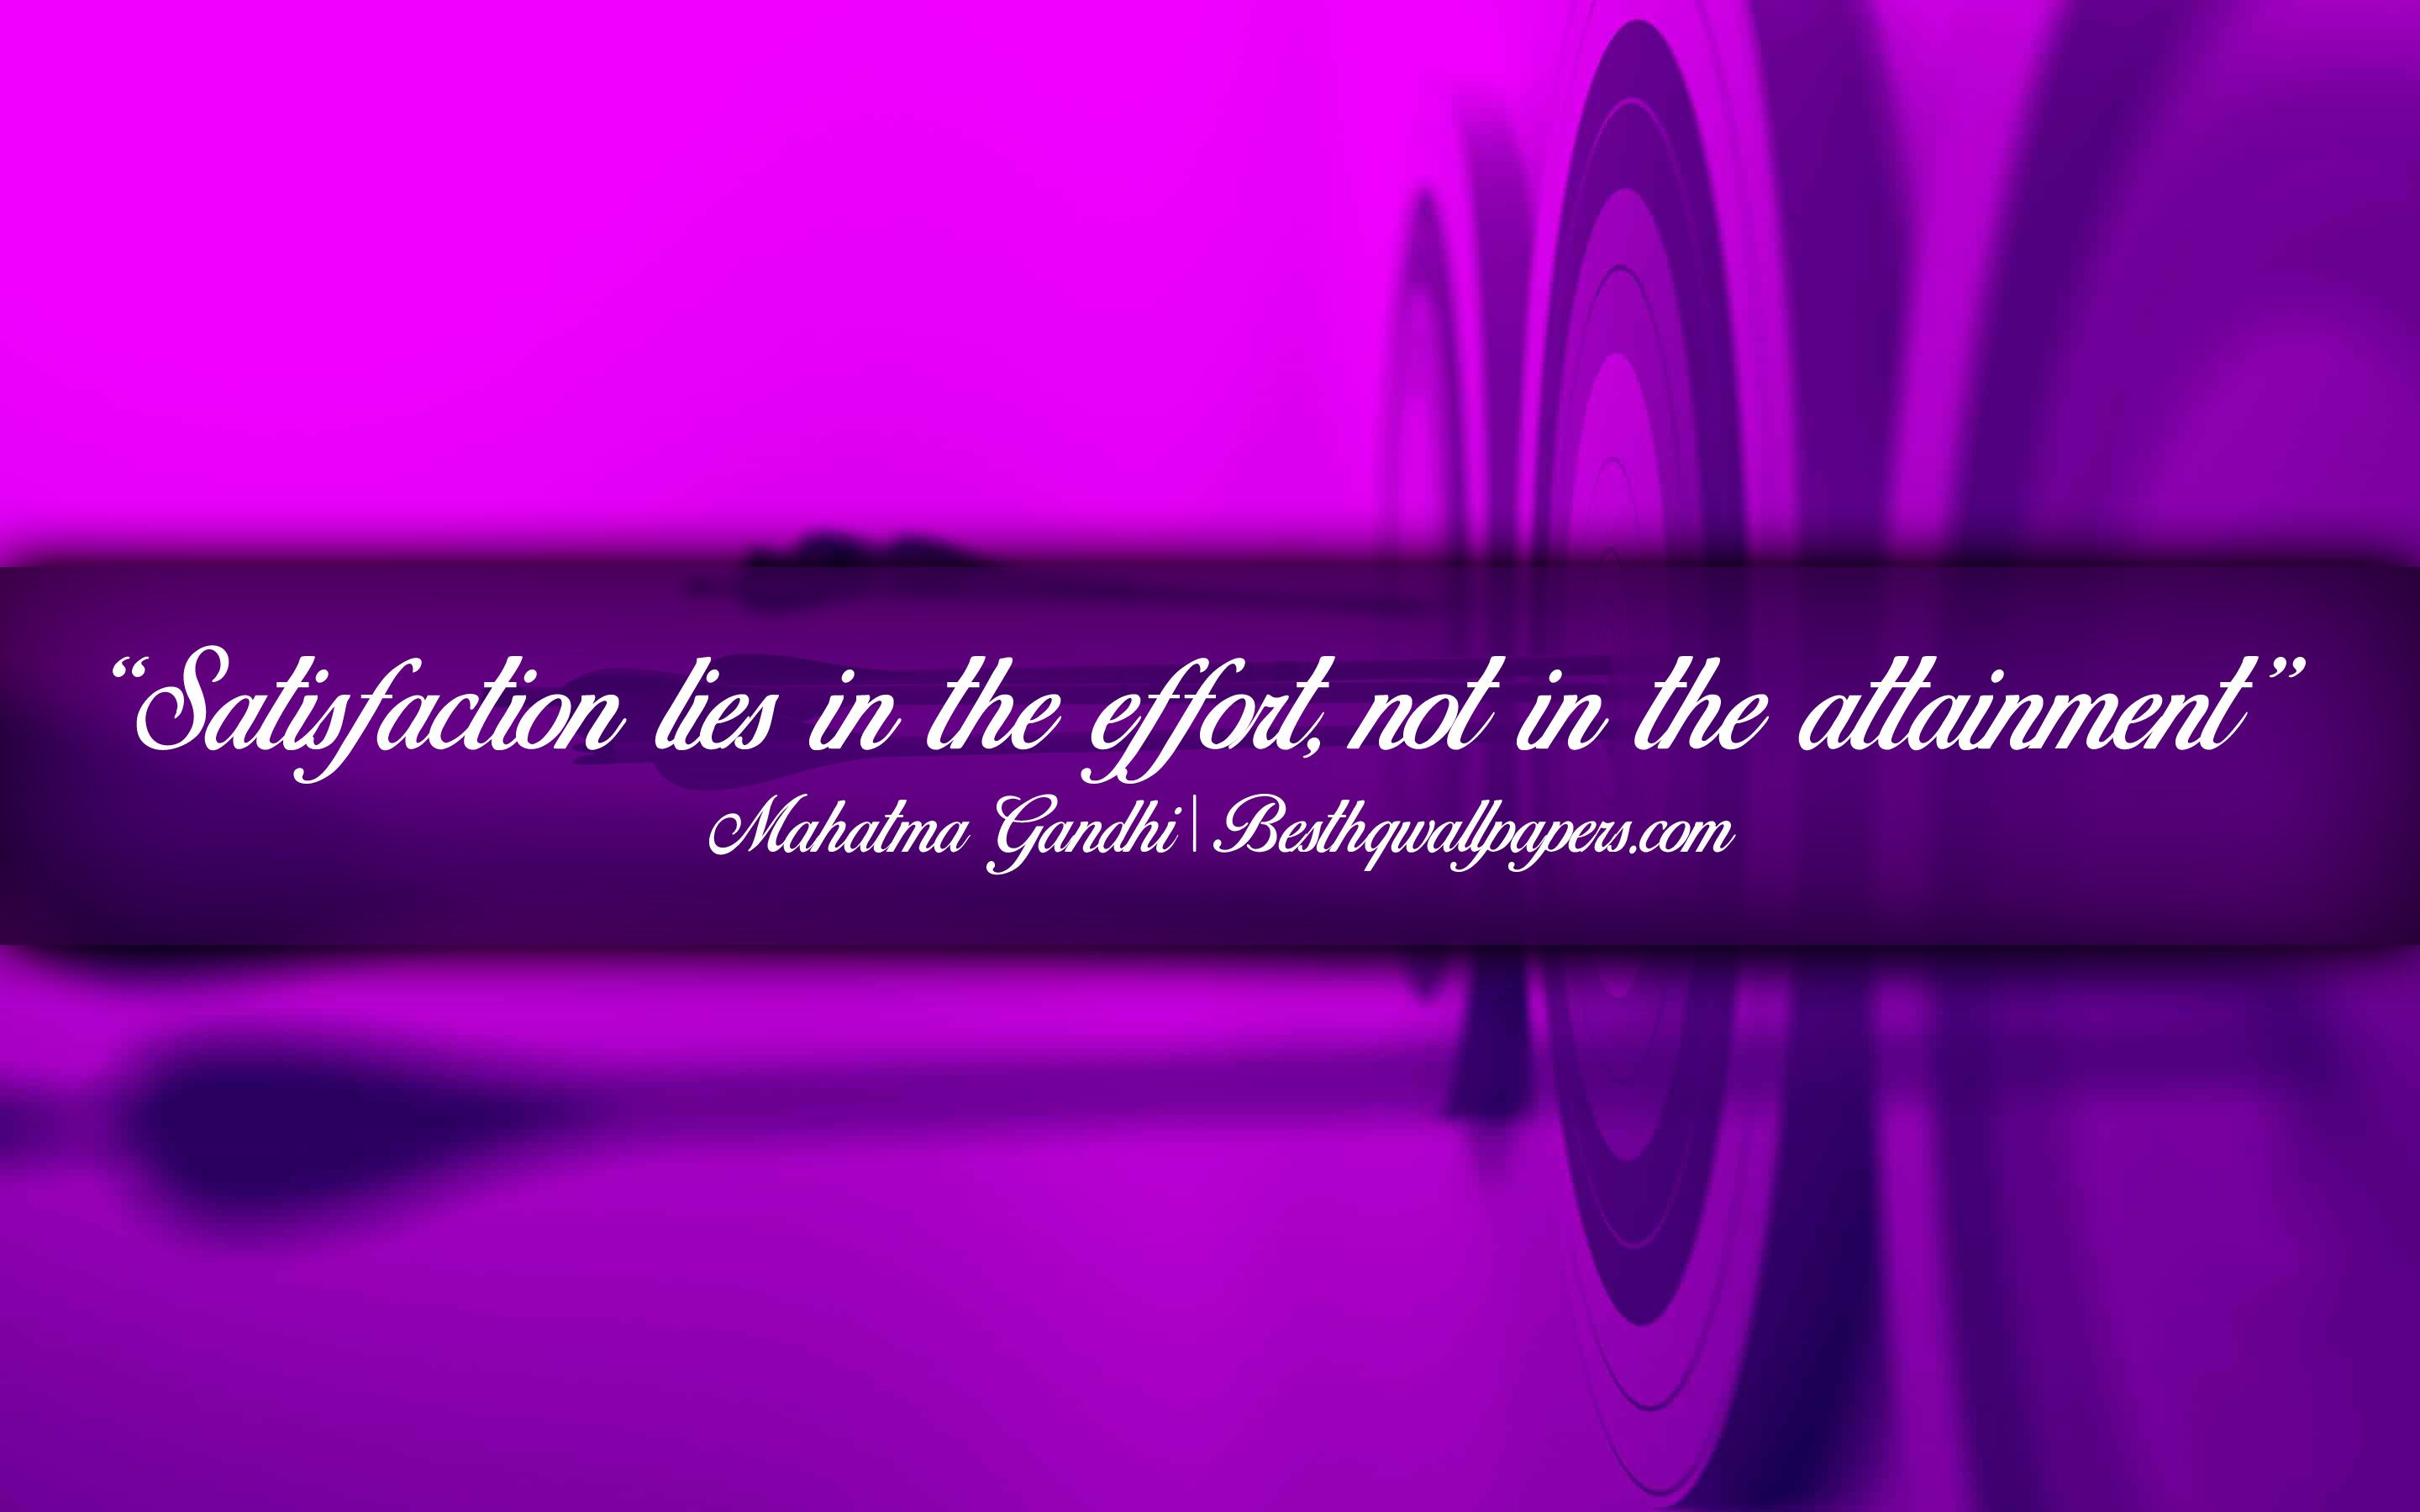 Download wallpaper Satisfaction lies in the effort Not in the attainment, Mahatma Gandhi, calligraphic text, quotes about satisfaction, Mahatma Gandhi quotes, inspiration, artwork background for desktop with resolution 2880x1800. High Quality HD